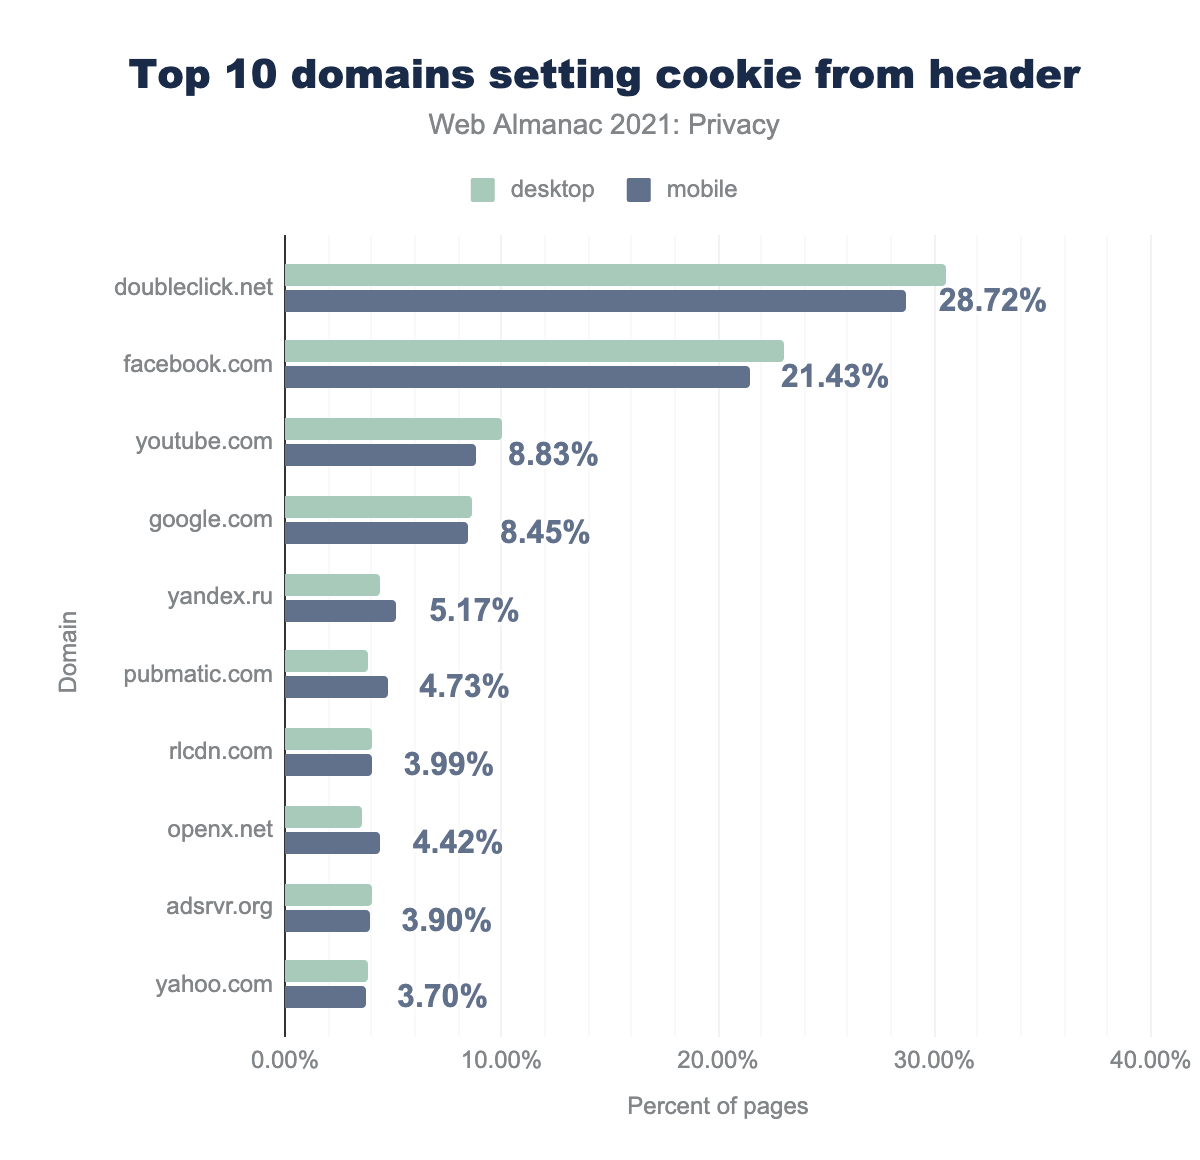 Top 10 domains setting cookies from headers.